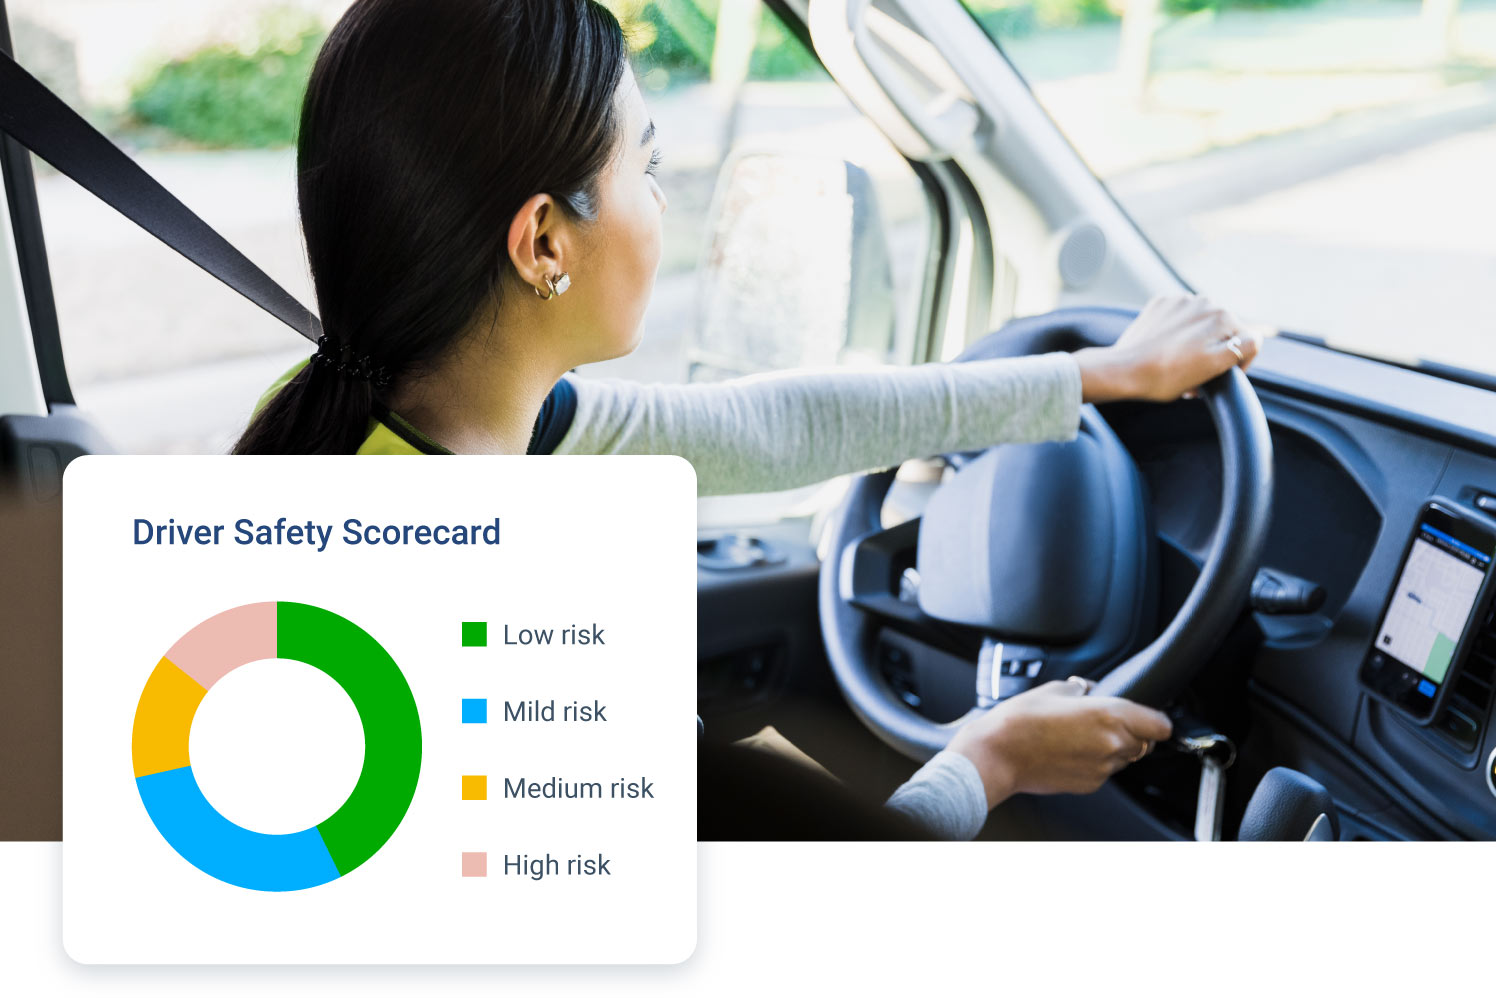 Woman driving a vehicle with Driver Safety scorecard shown in bottom left